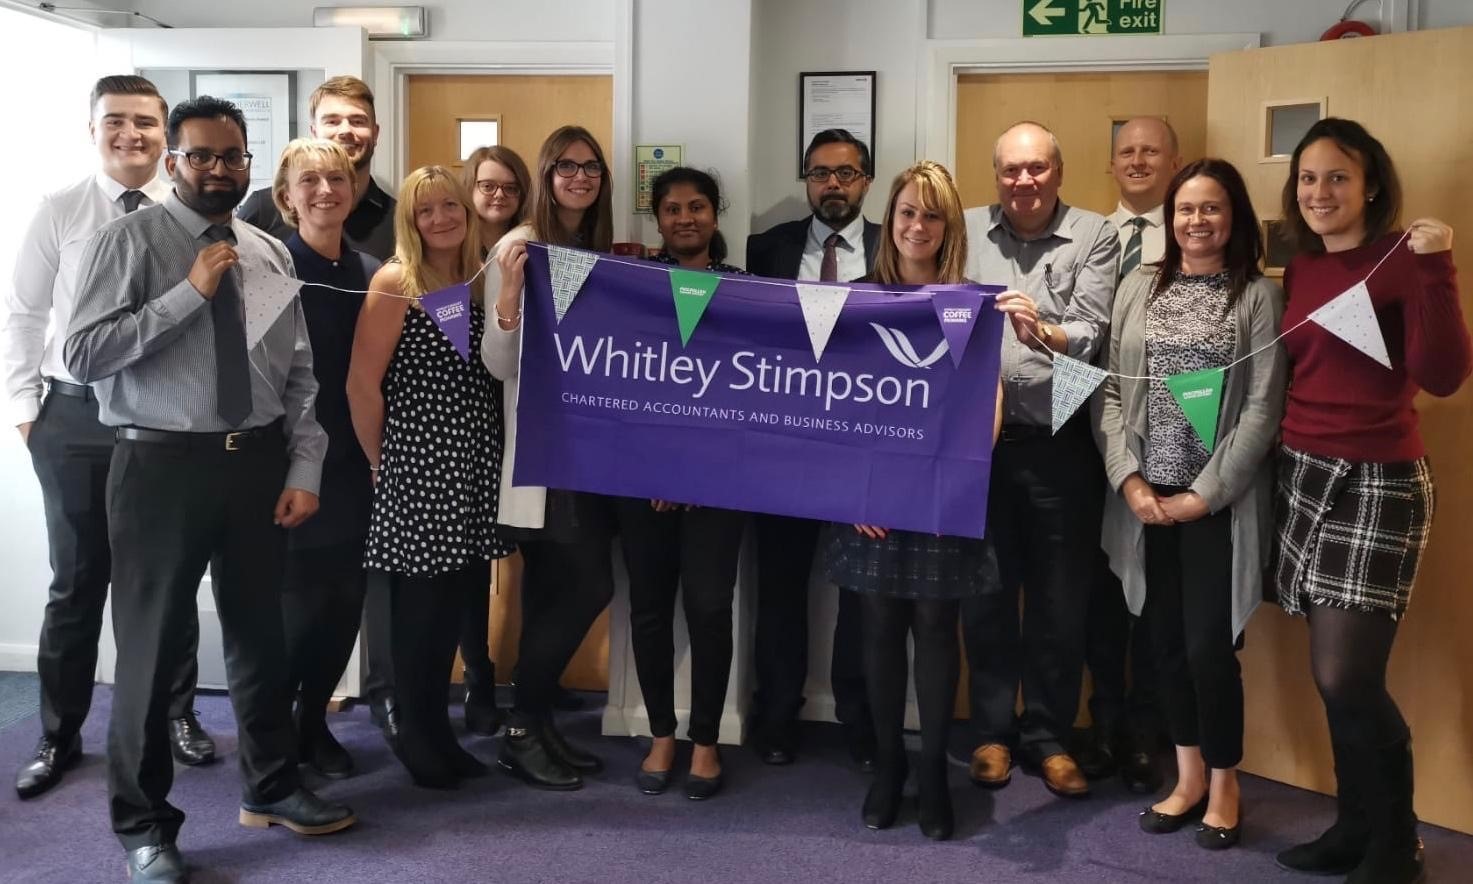 Whitley Stimpson in High Wycombe raises over £550 for Macmillan Cancer Support